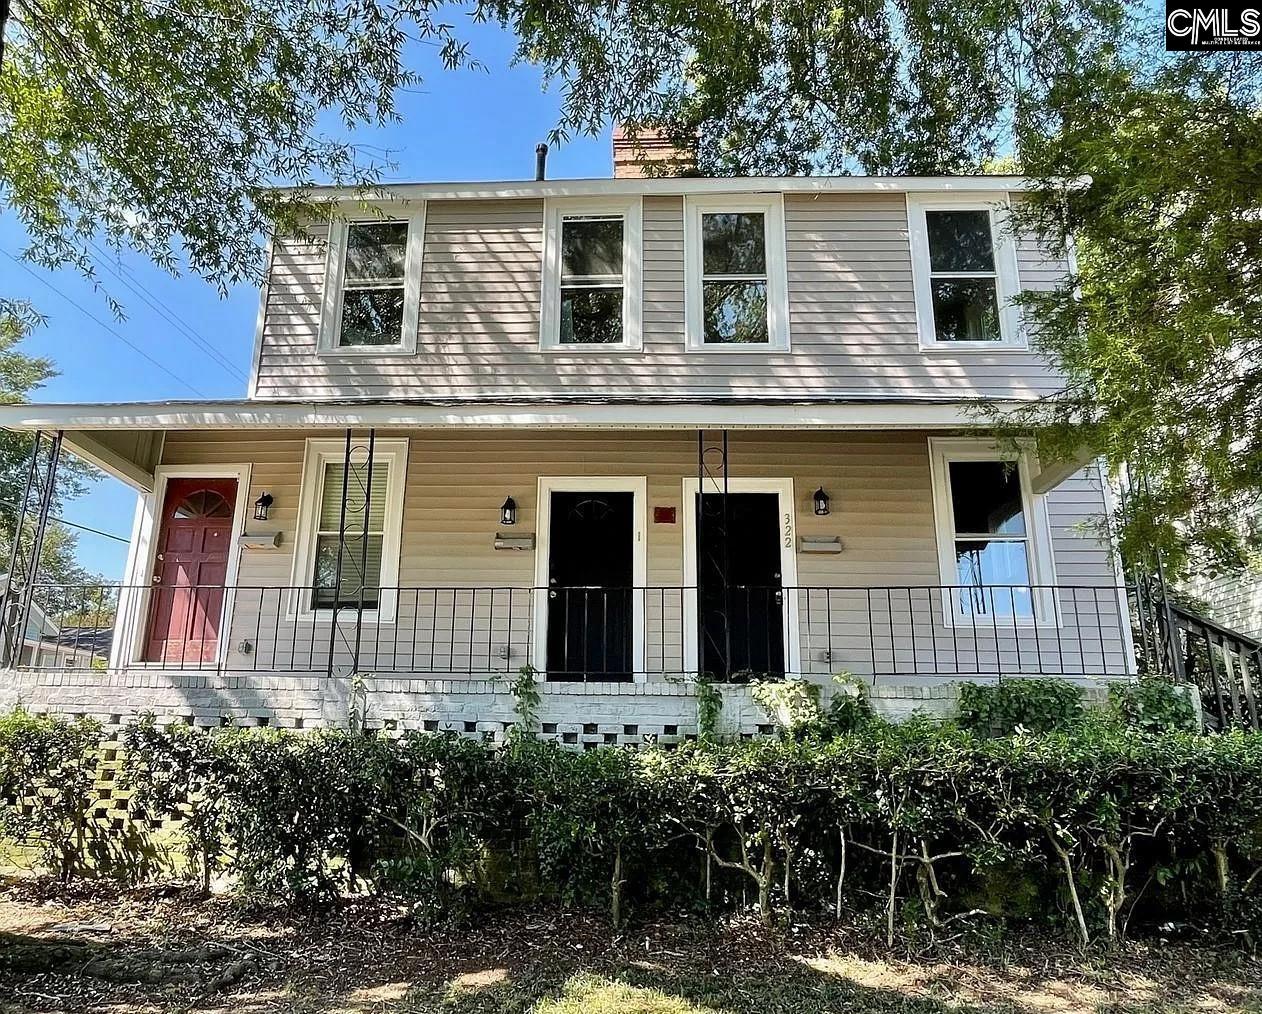 322/324 Oliver Street West Columbia, SC 29169